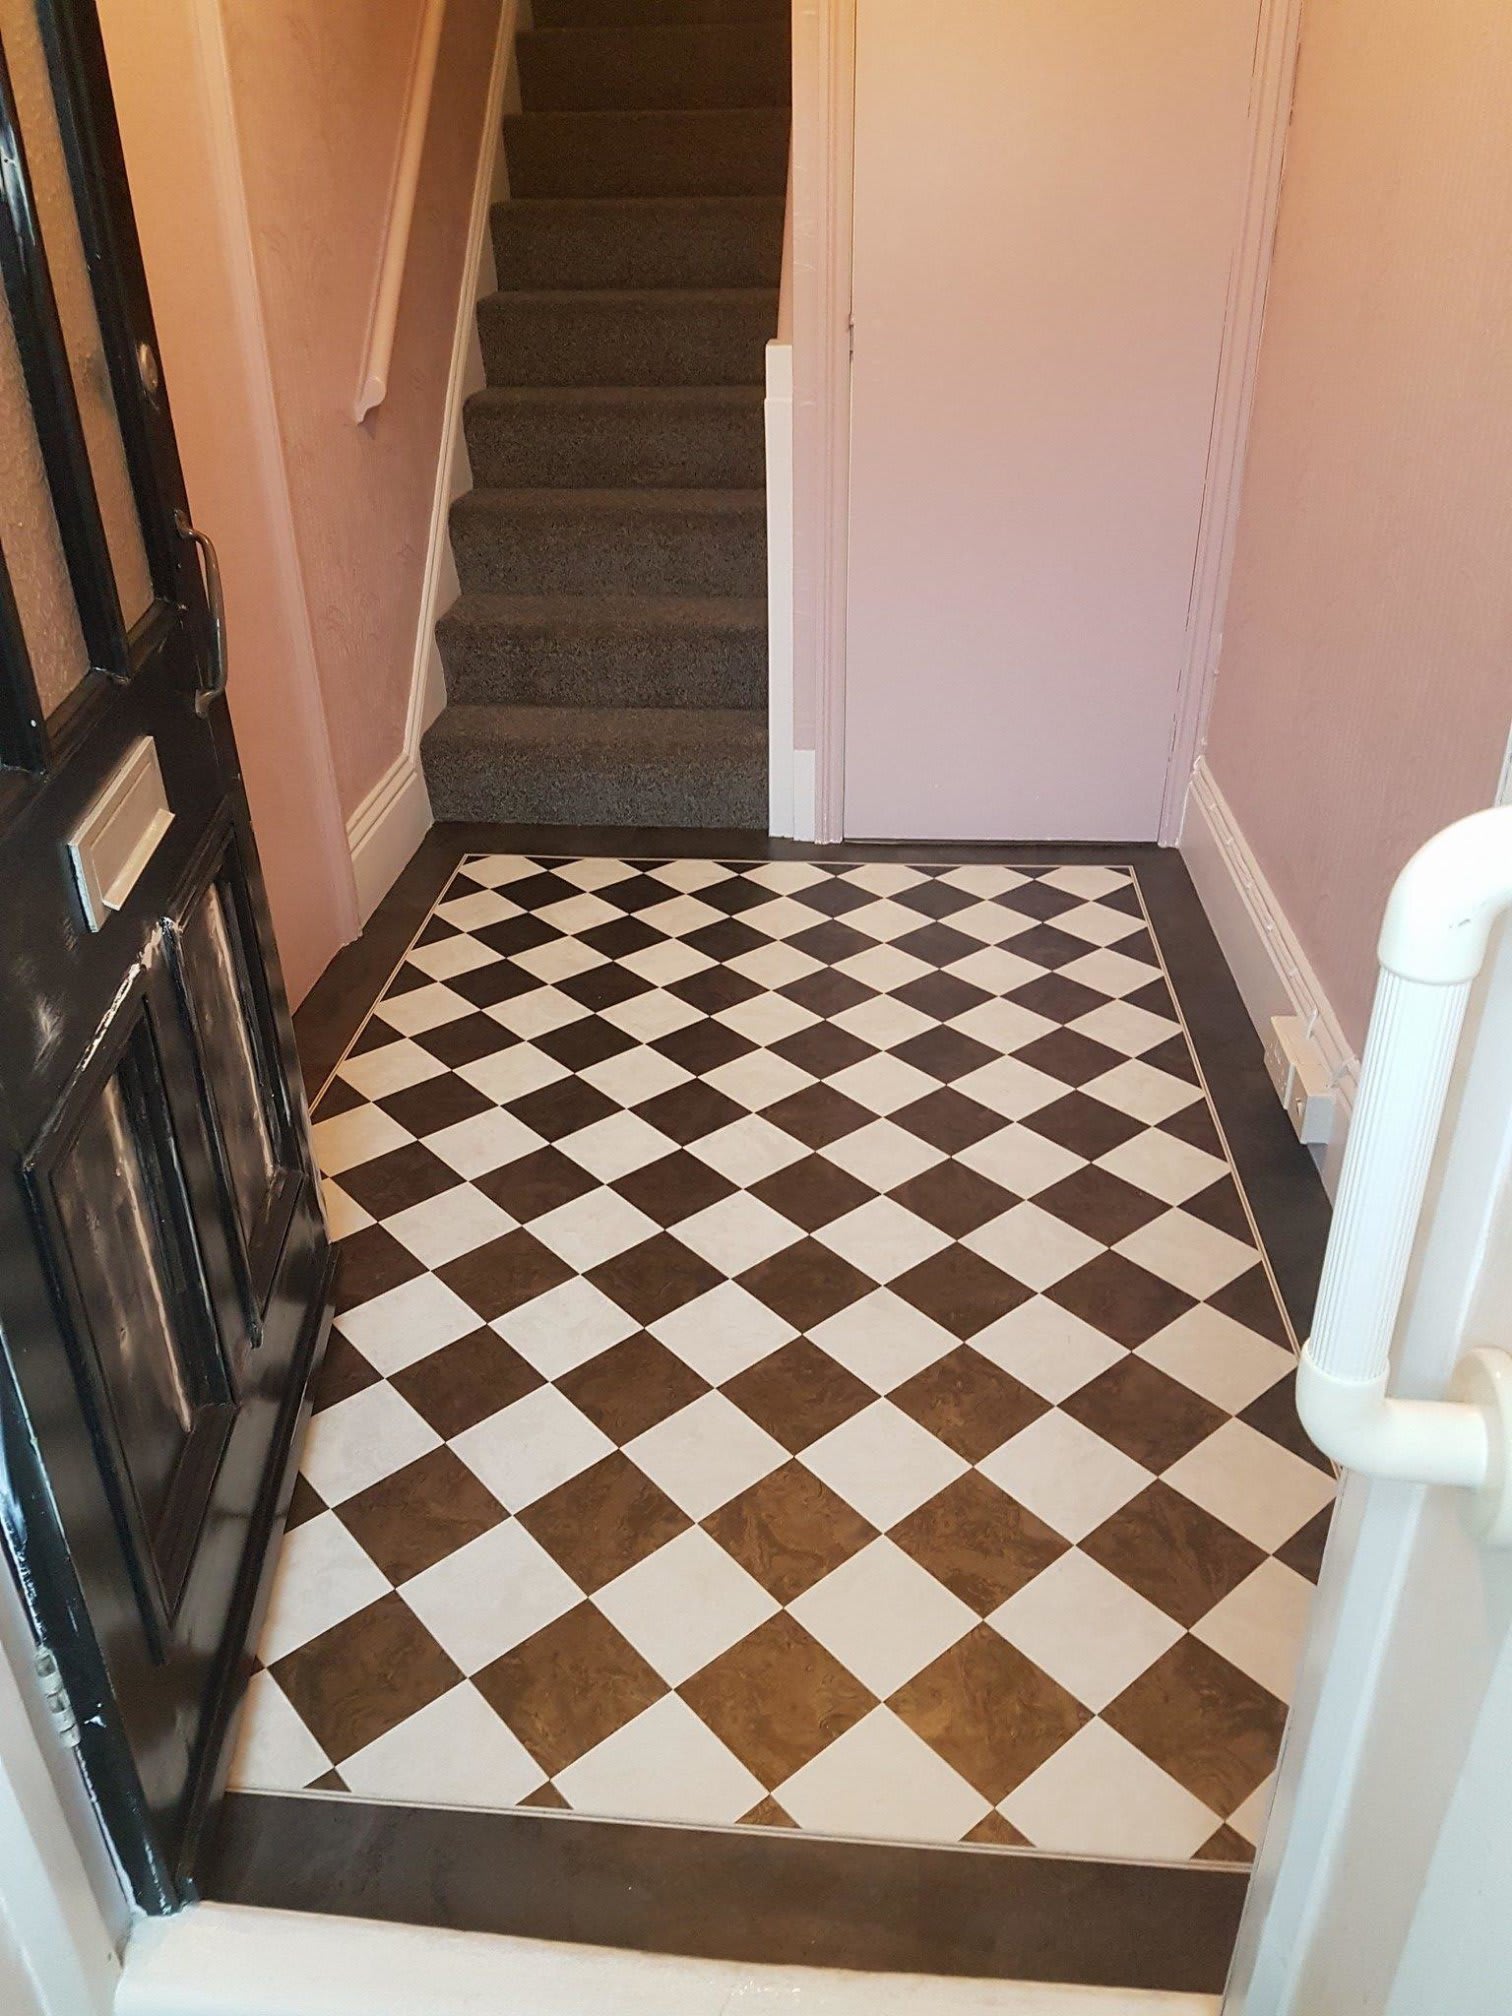 Images I.N.S Flooring Specialists